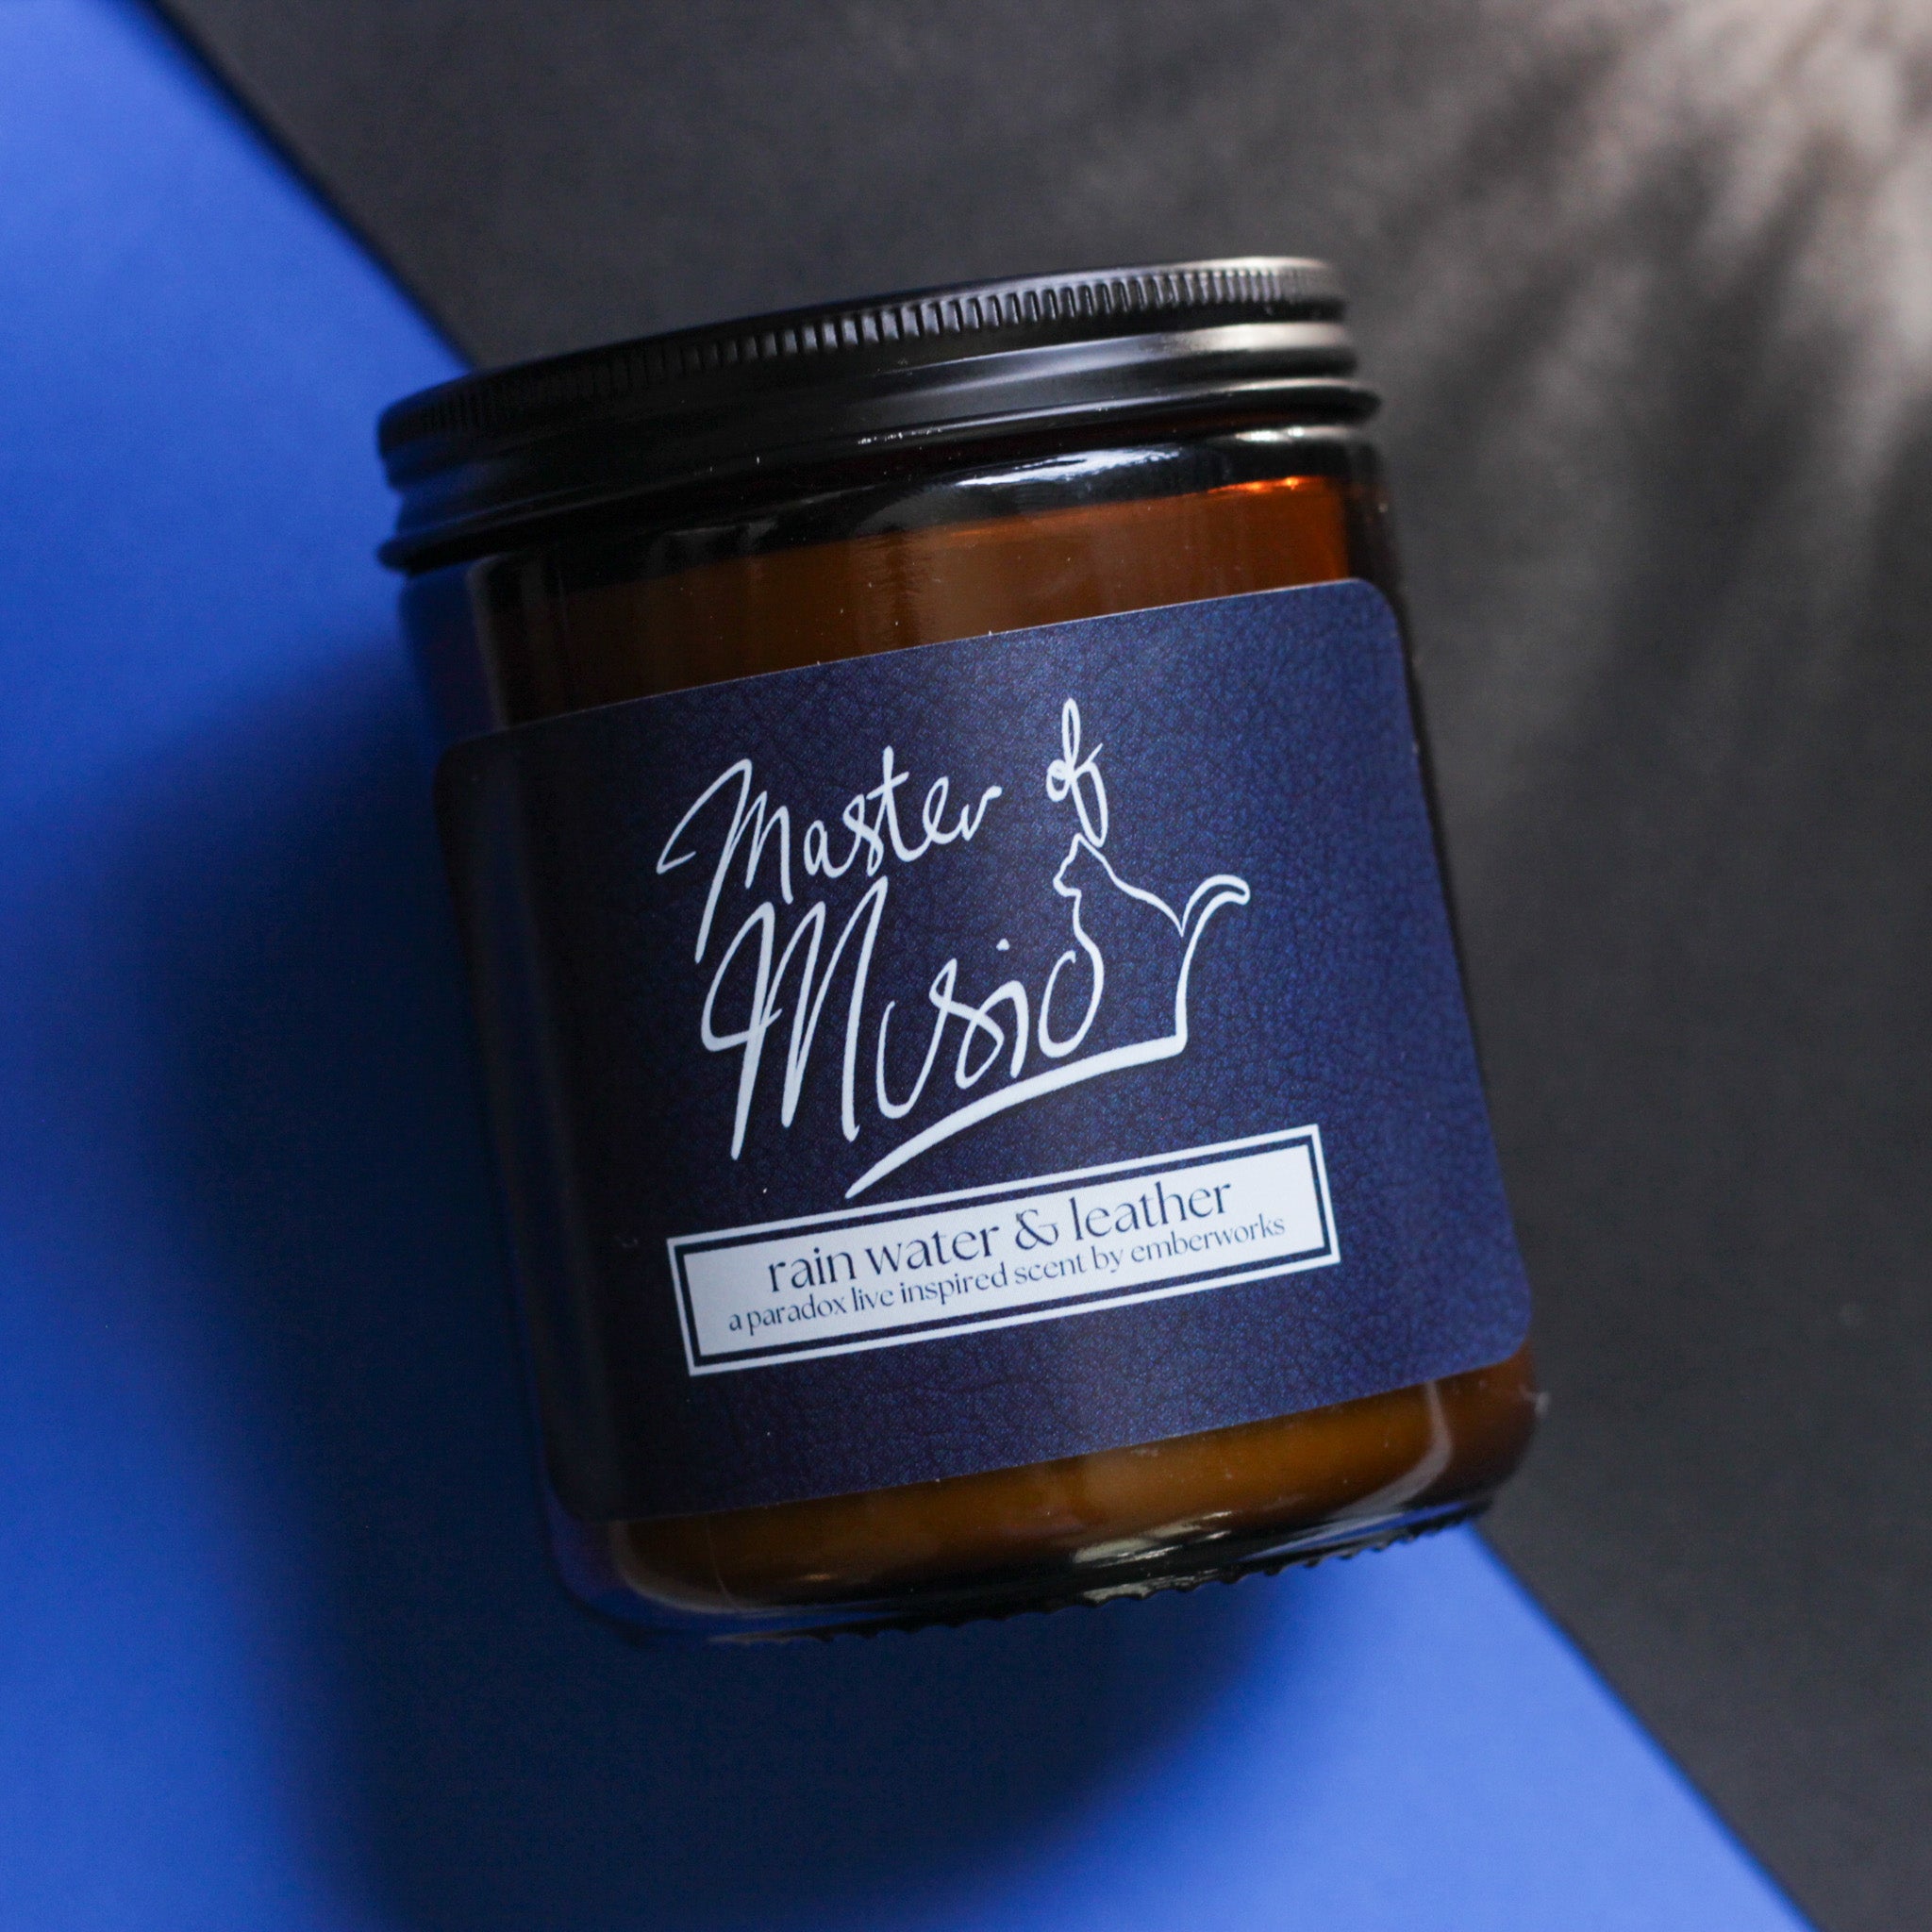 Master of Music - The Cat's Whiskers Inspired Scent